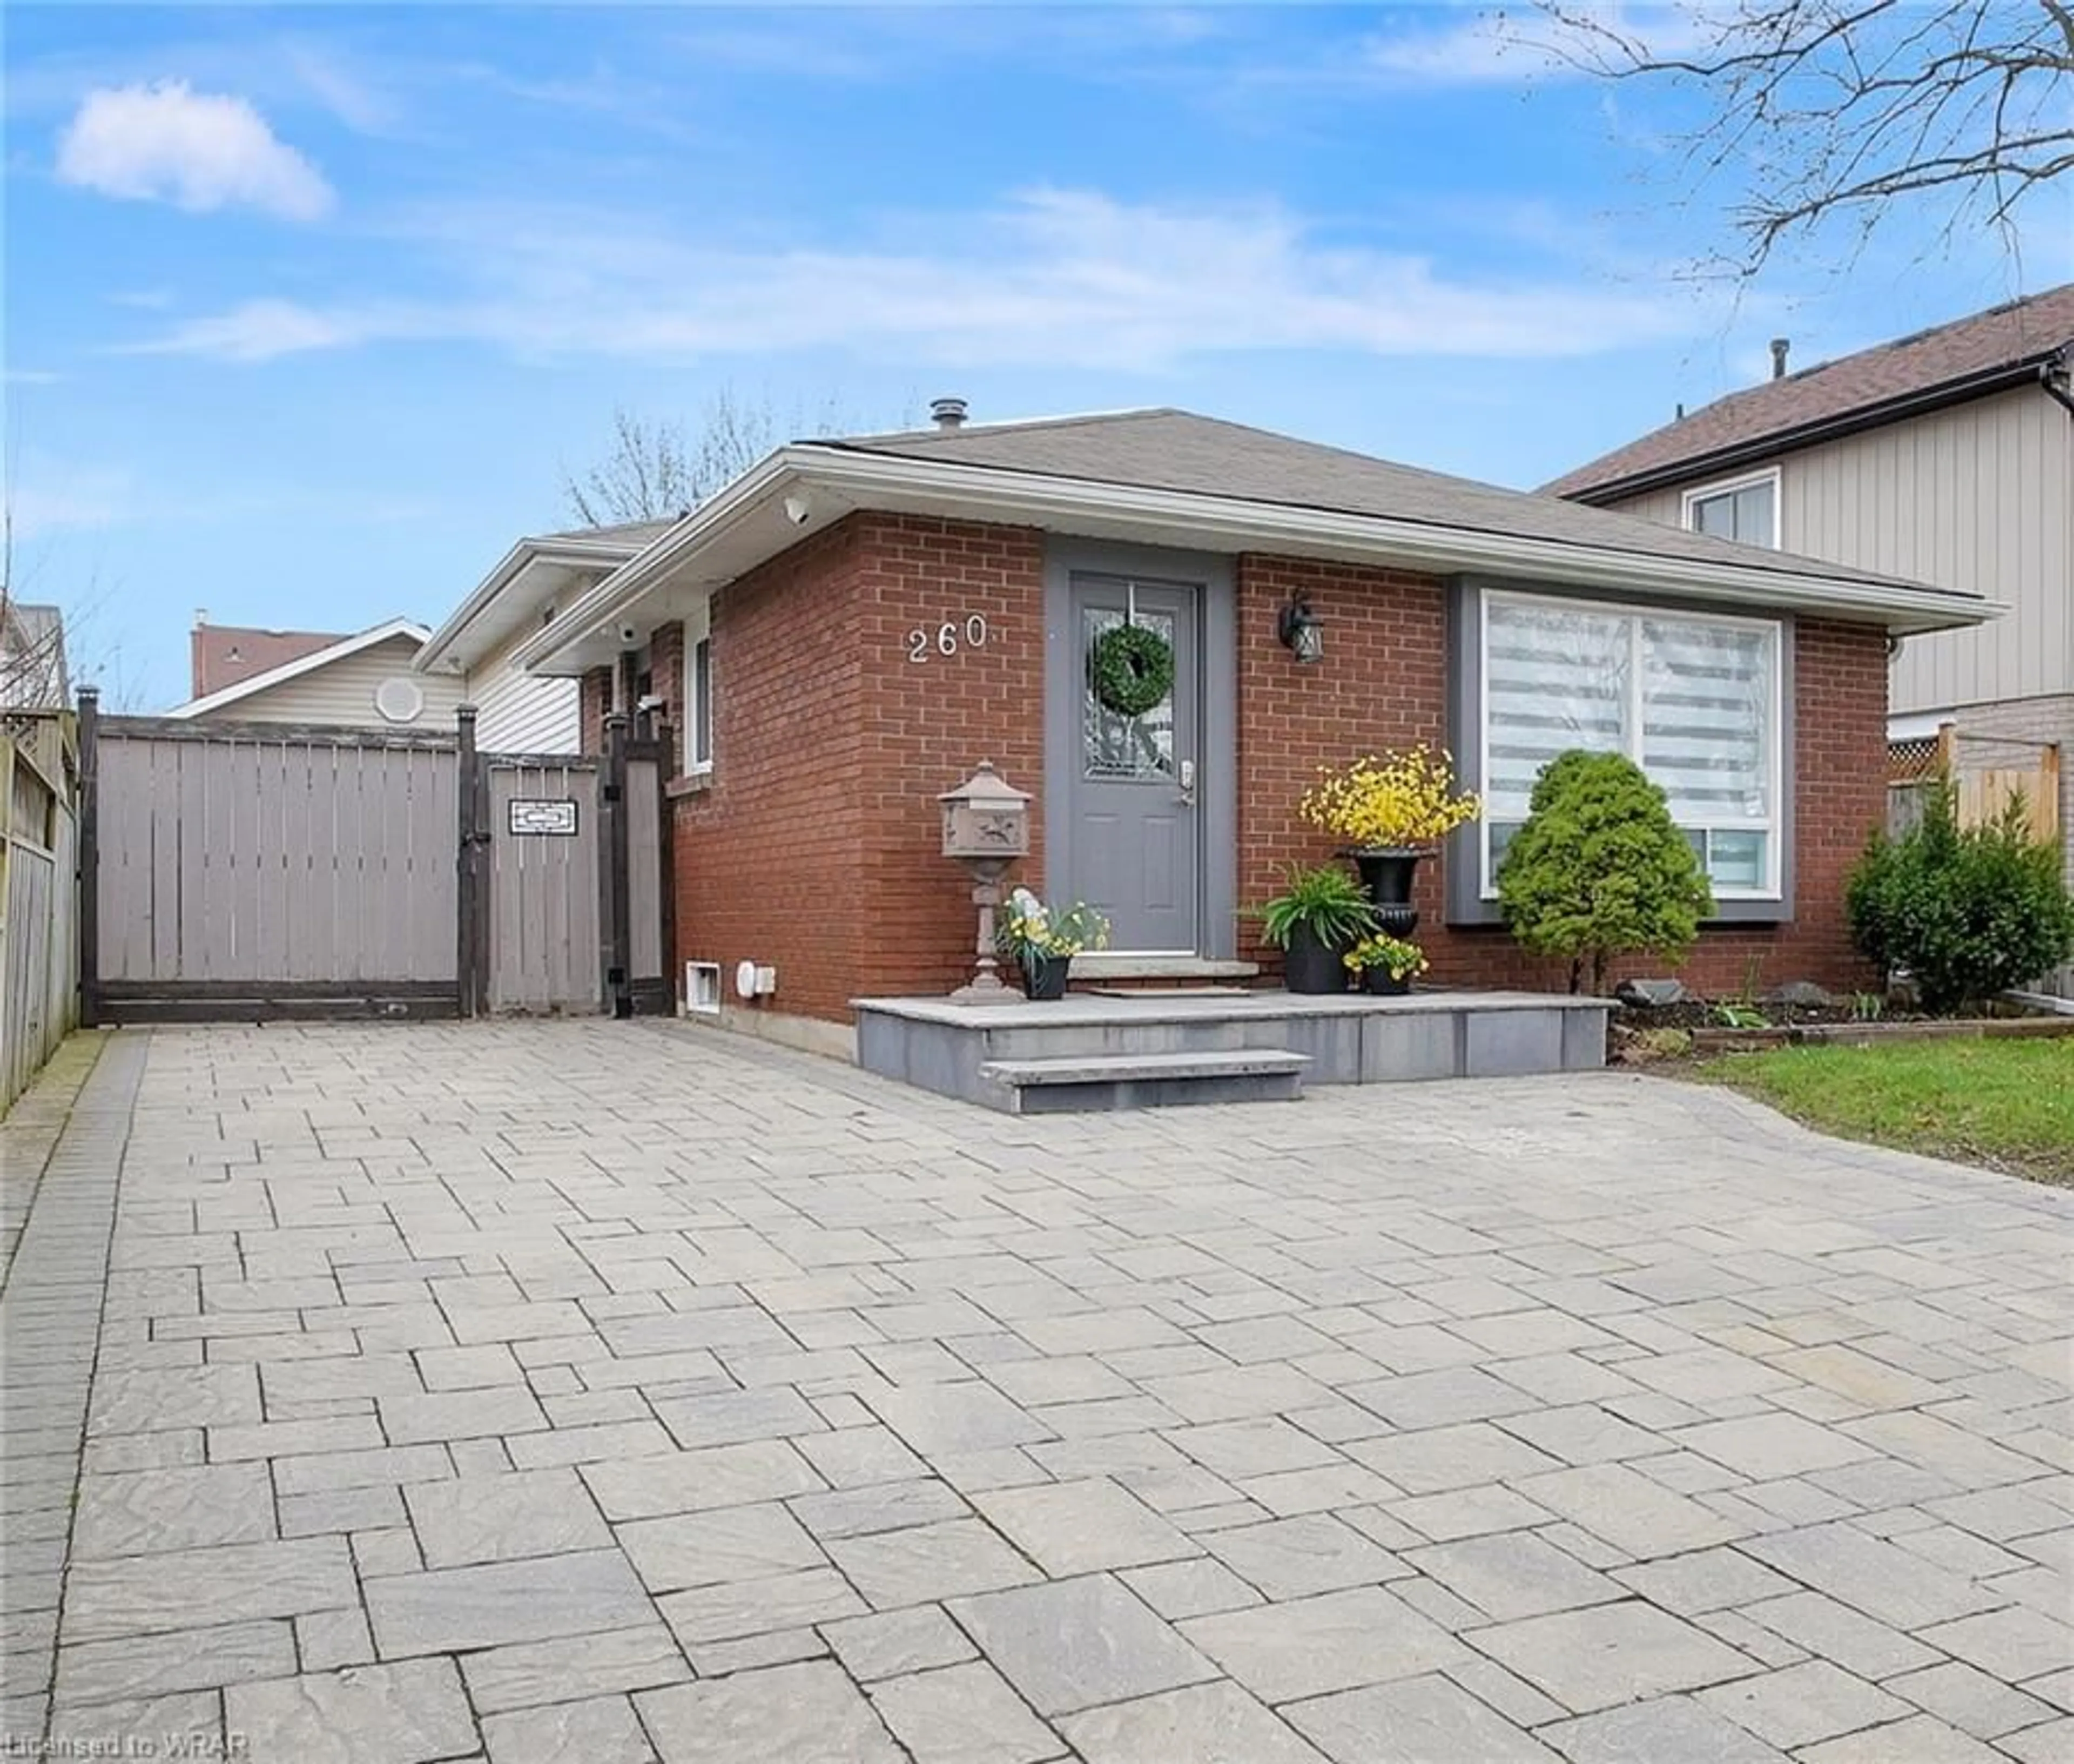 Home with brick exterior material for 260 Johanna Dr, Cambridge Ontario N1S 4C6